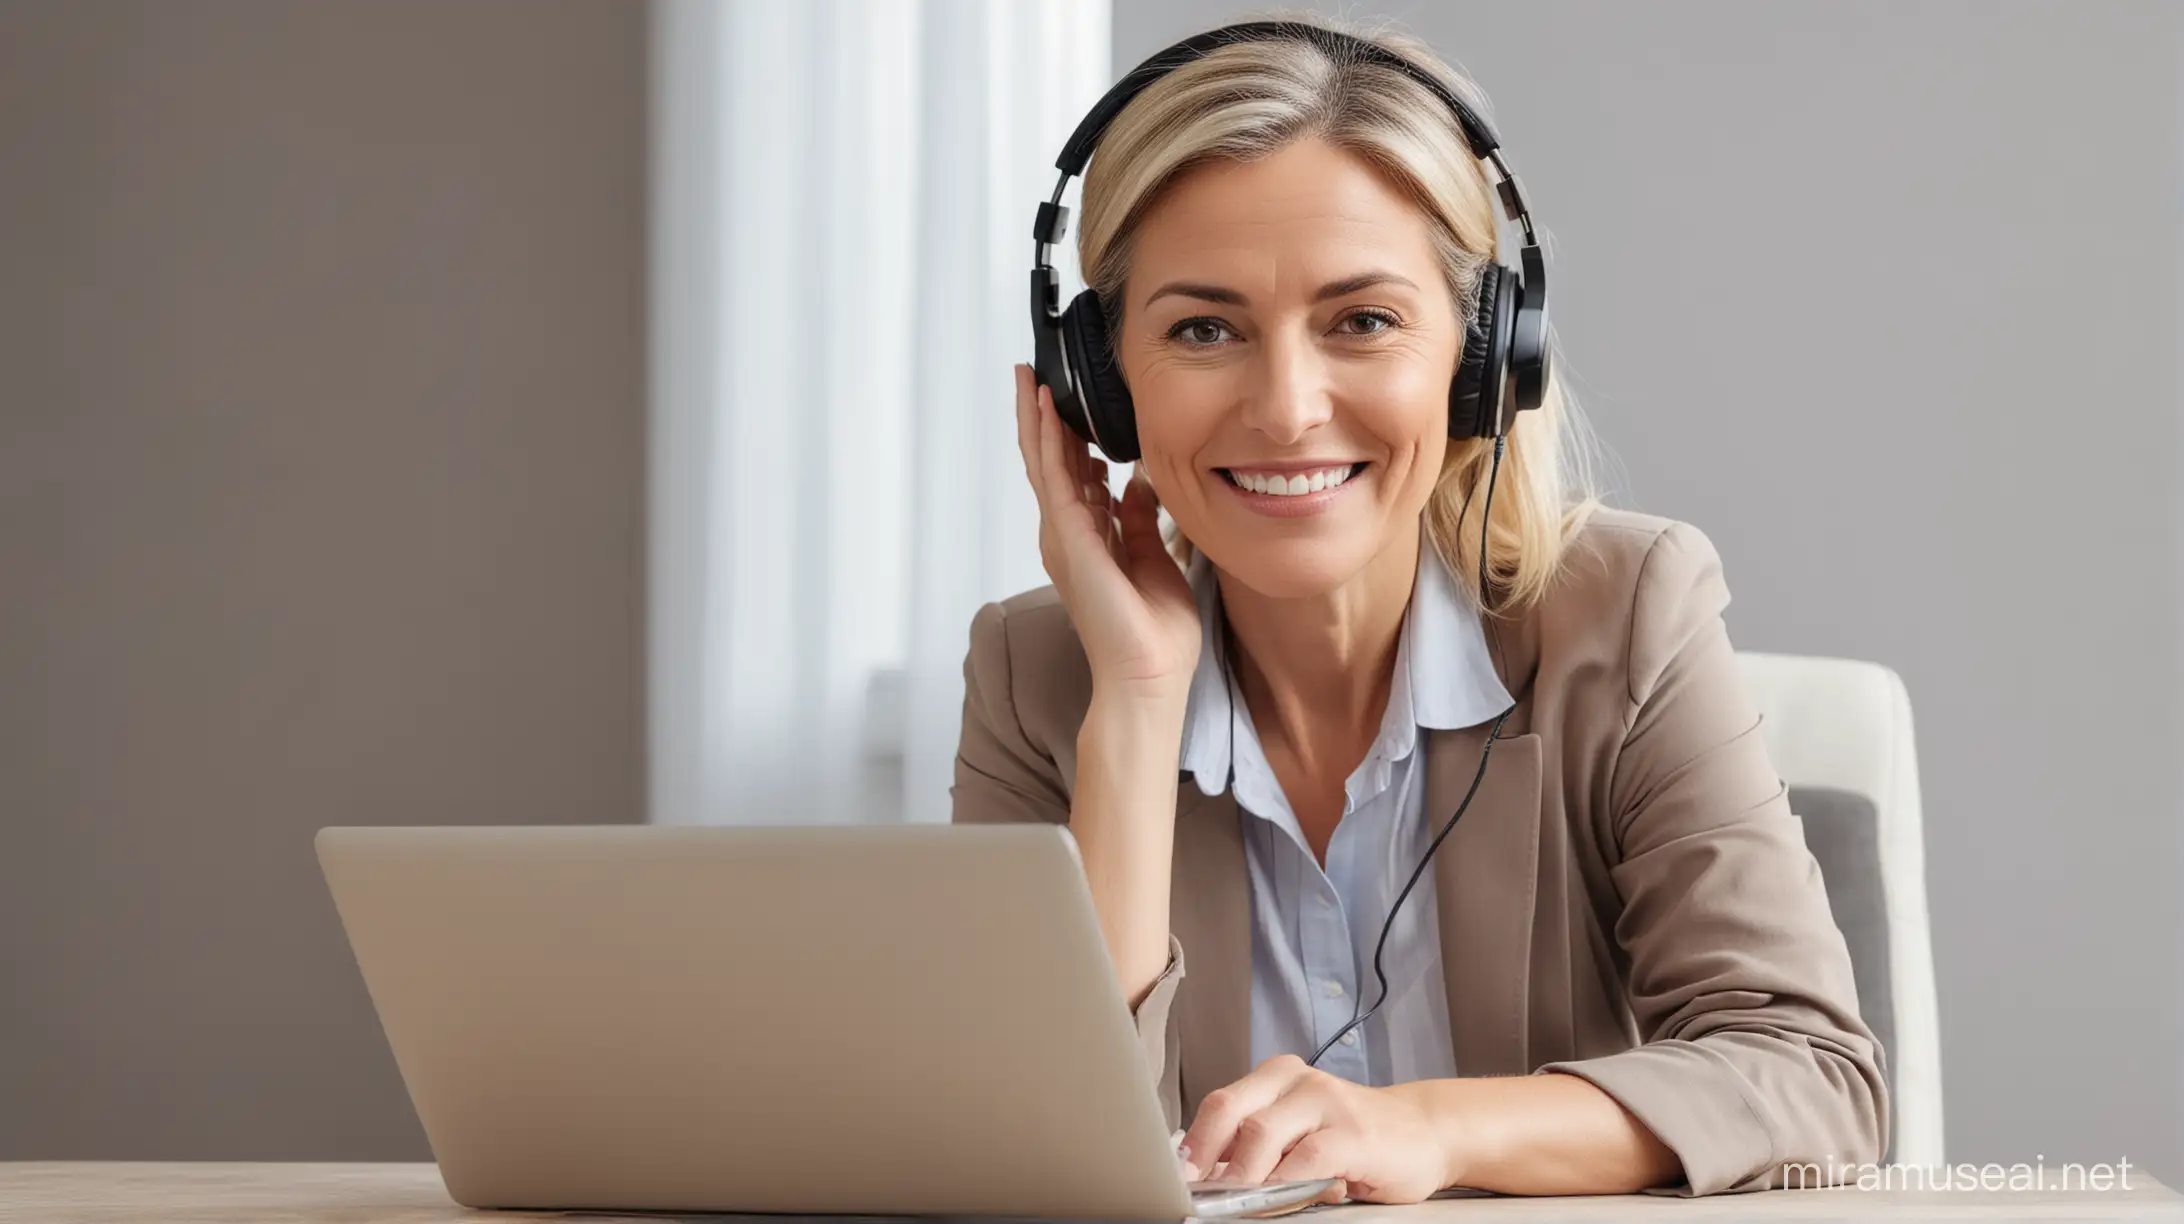 Middleaged Businesswoman Engaged in Online Course with Laptop and Headphones